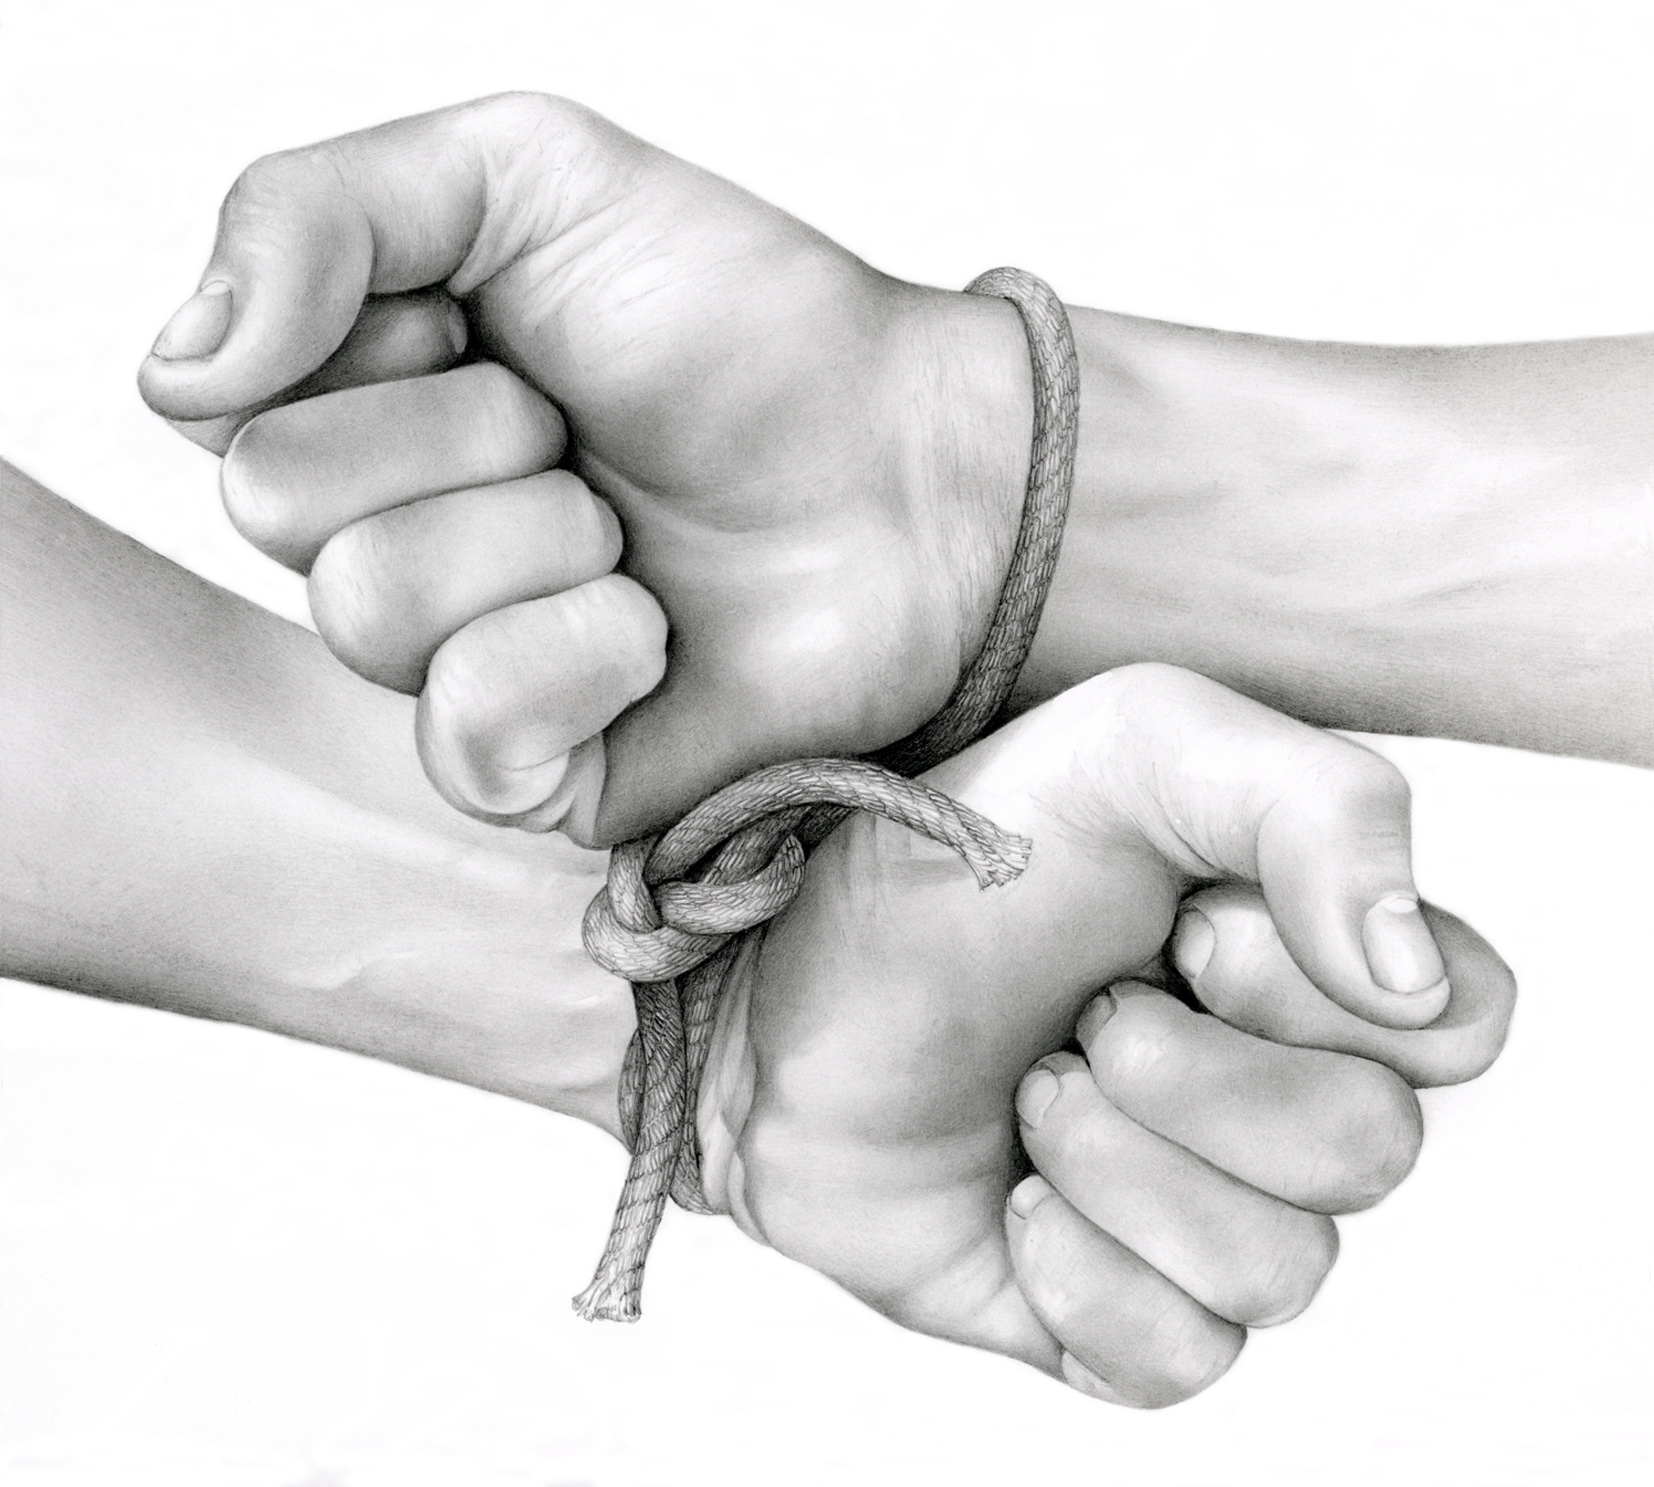 Hands Bound With Rope